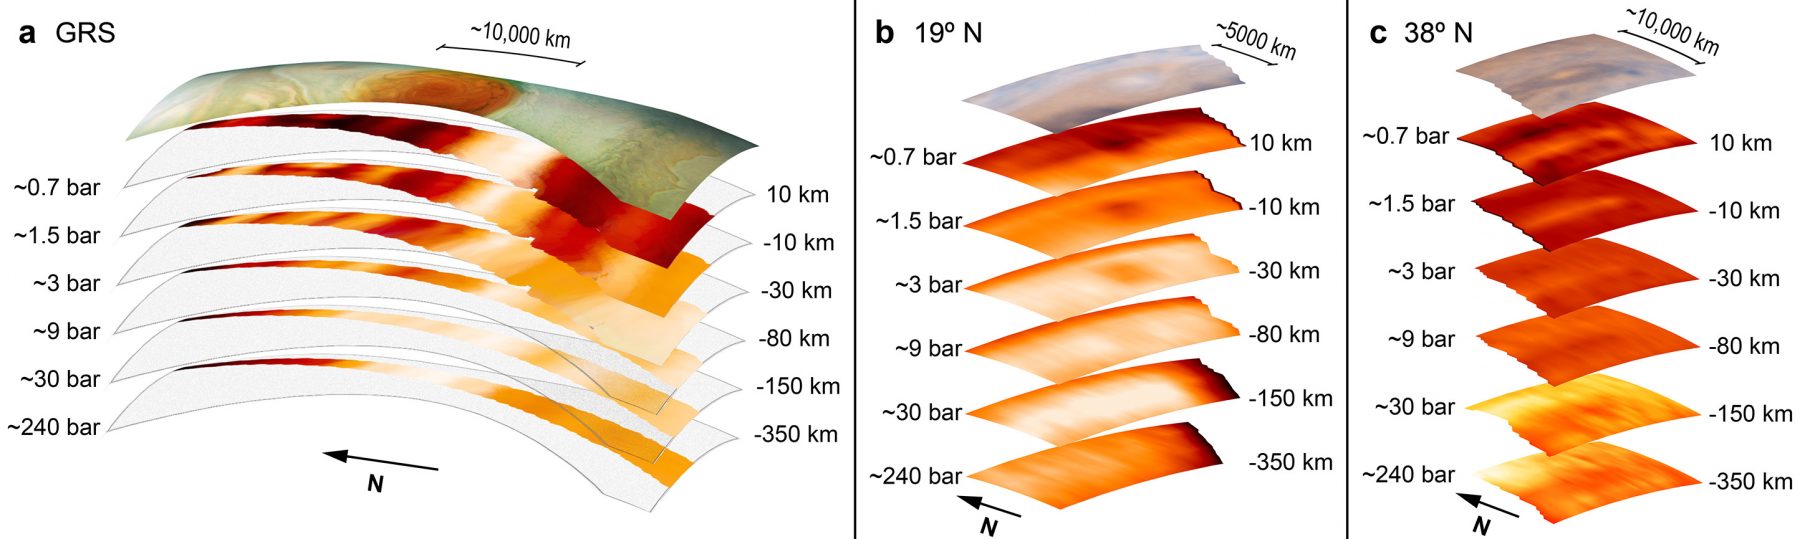 Horizontal sections of three eddies: a - Great Red Spot, b - cyclone, c - anticyclone. Credit: SJ Bolton et al. / Science, 2021